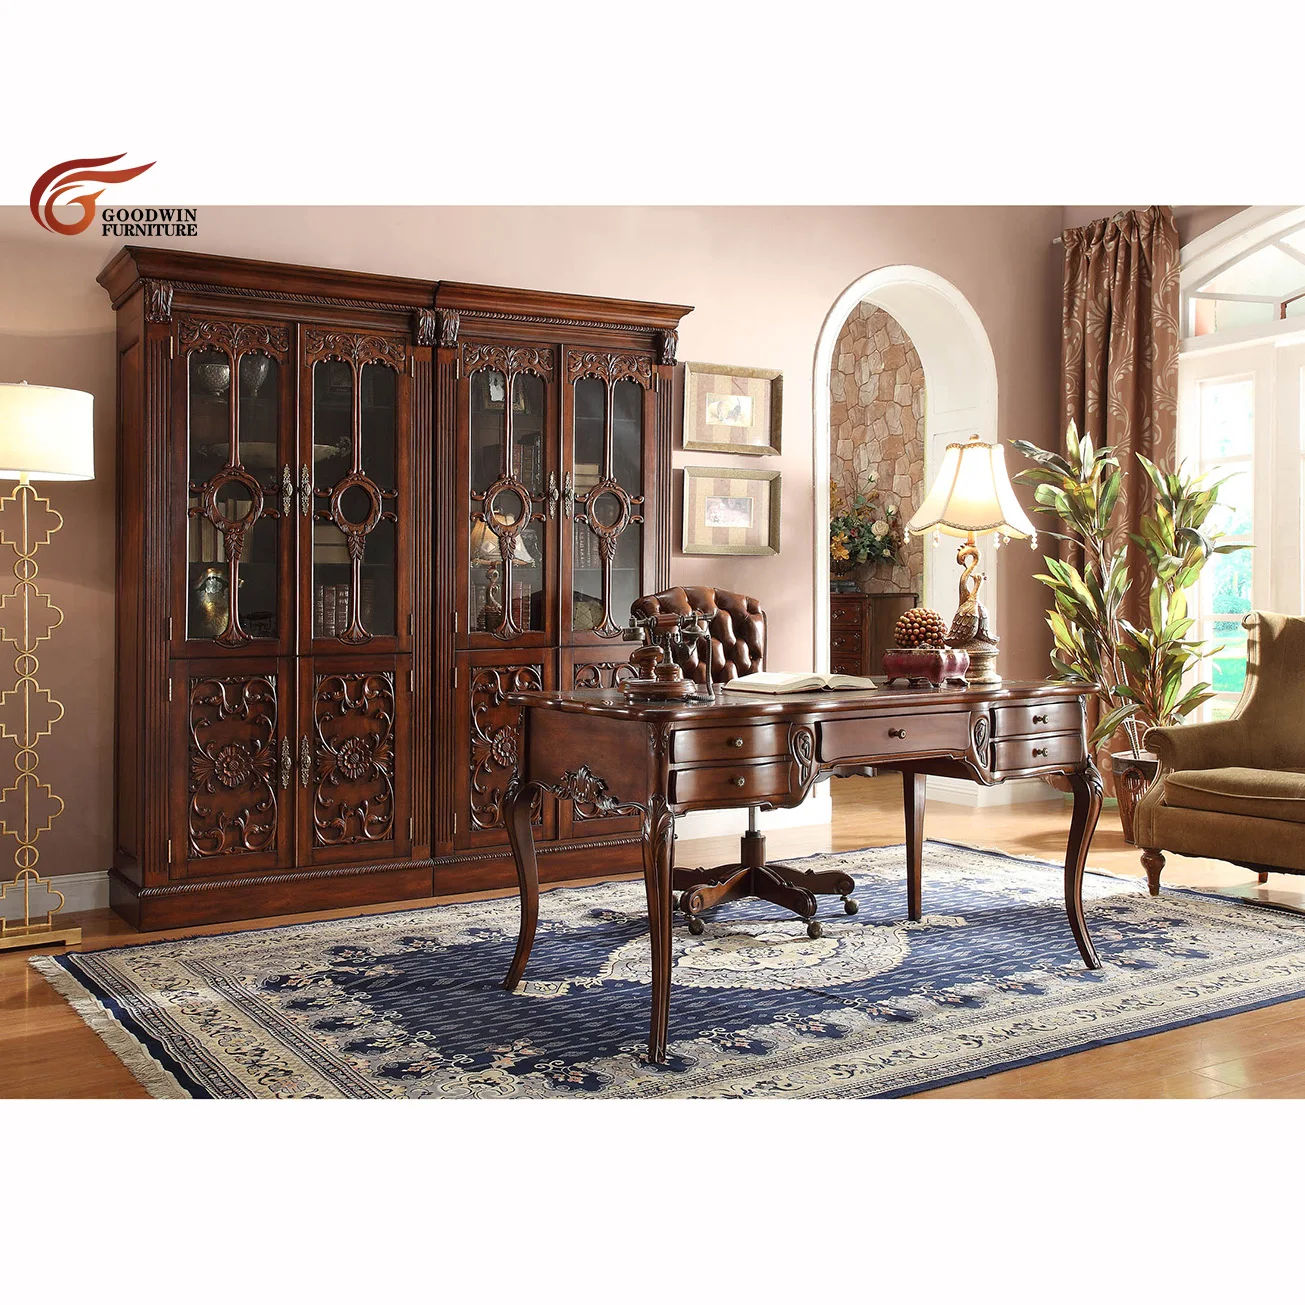 Competitive Price Antique Style Popular Design Home Use Study Room Furniture Room Study Table Study Room Chair GGM397 (1600372157716)